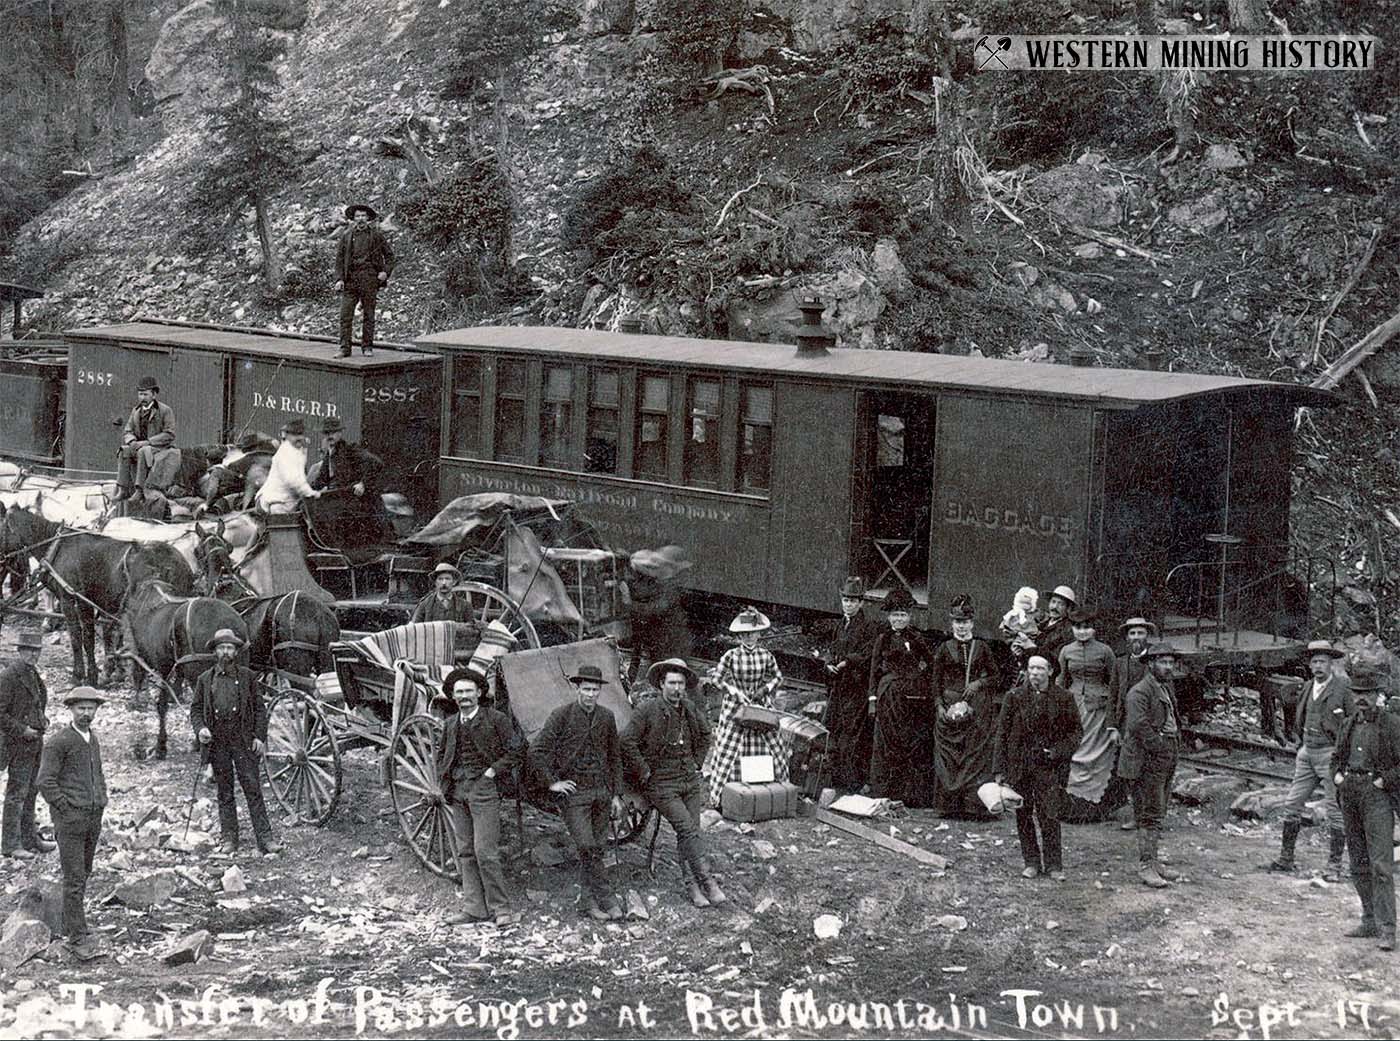 Rail passengers at Red Mountain Town Sept. 17 1888